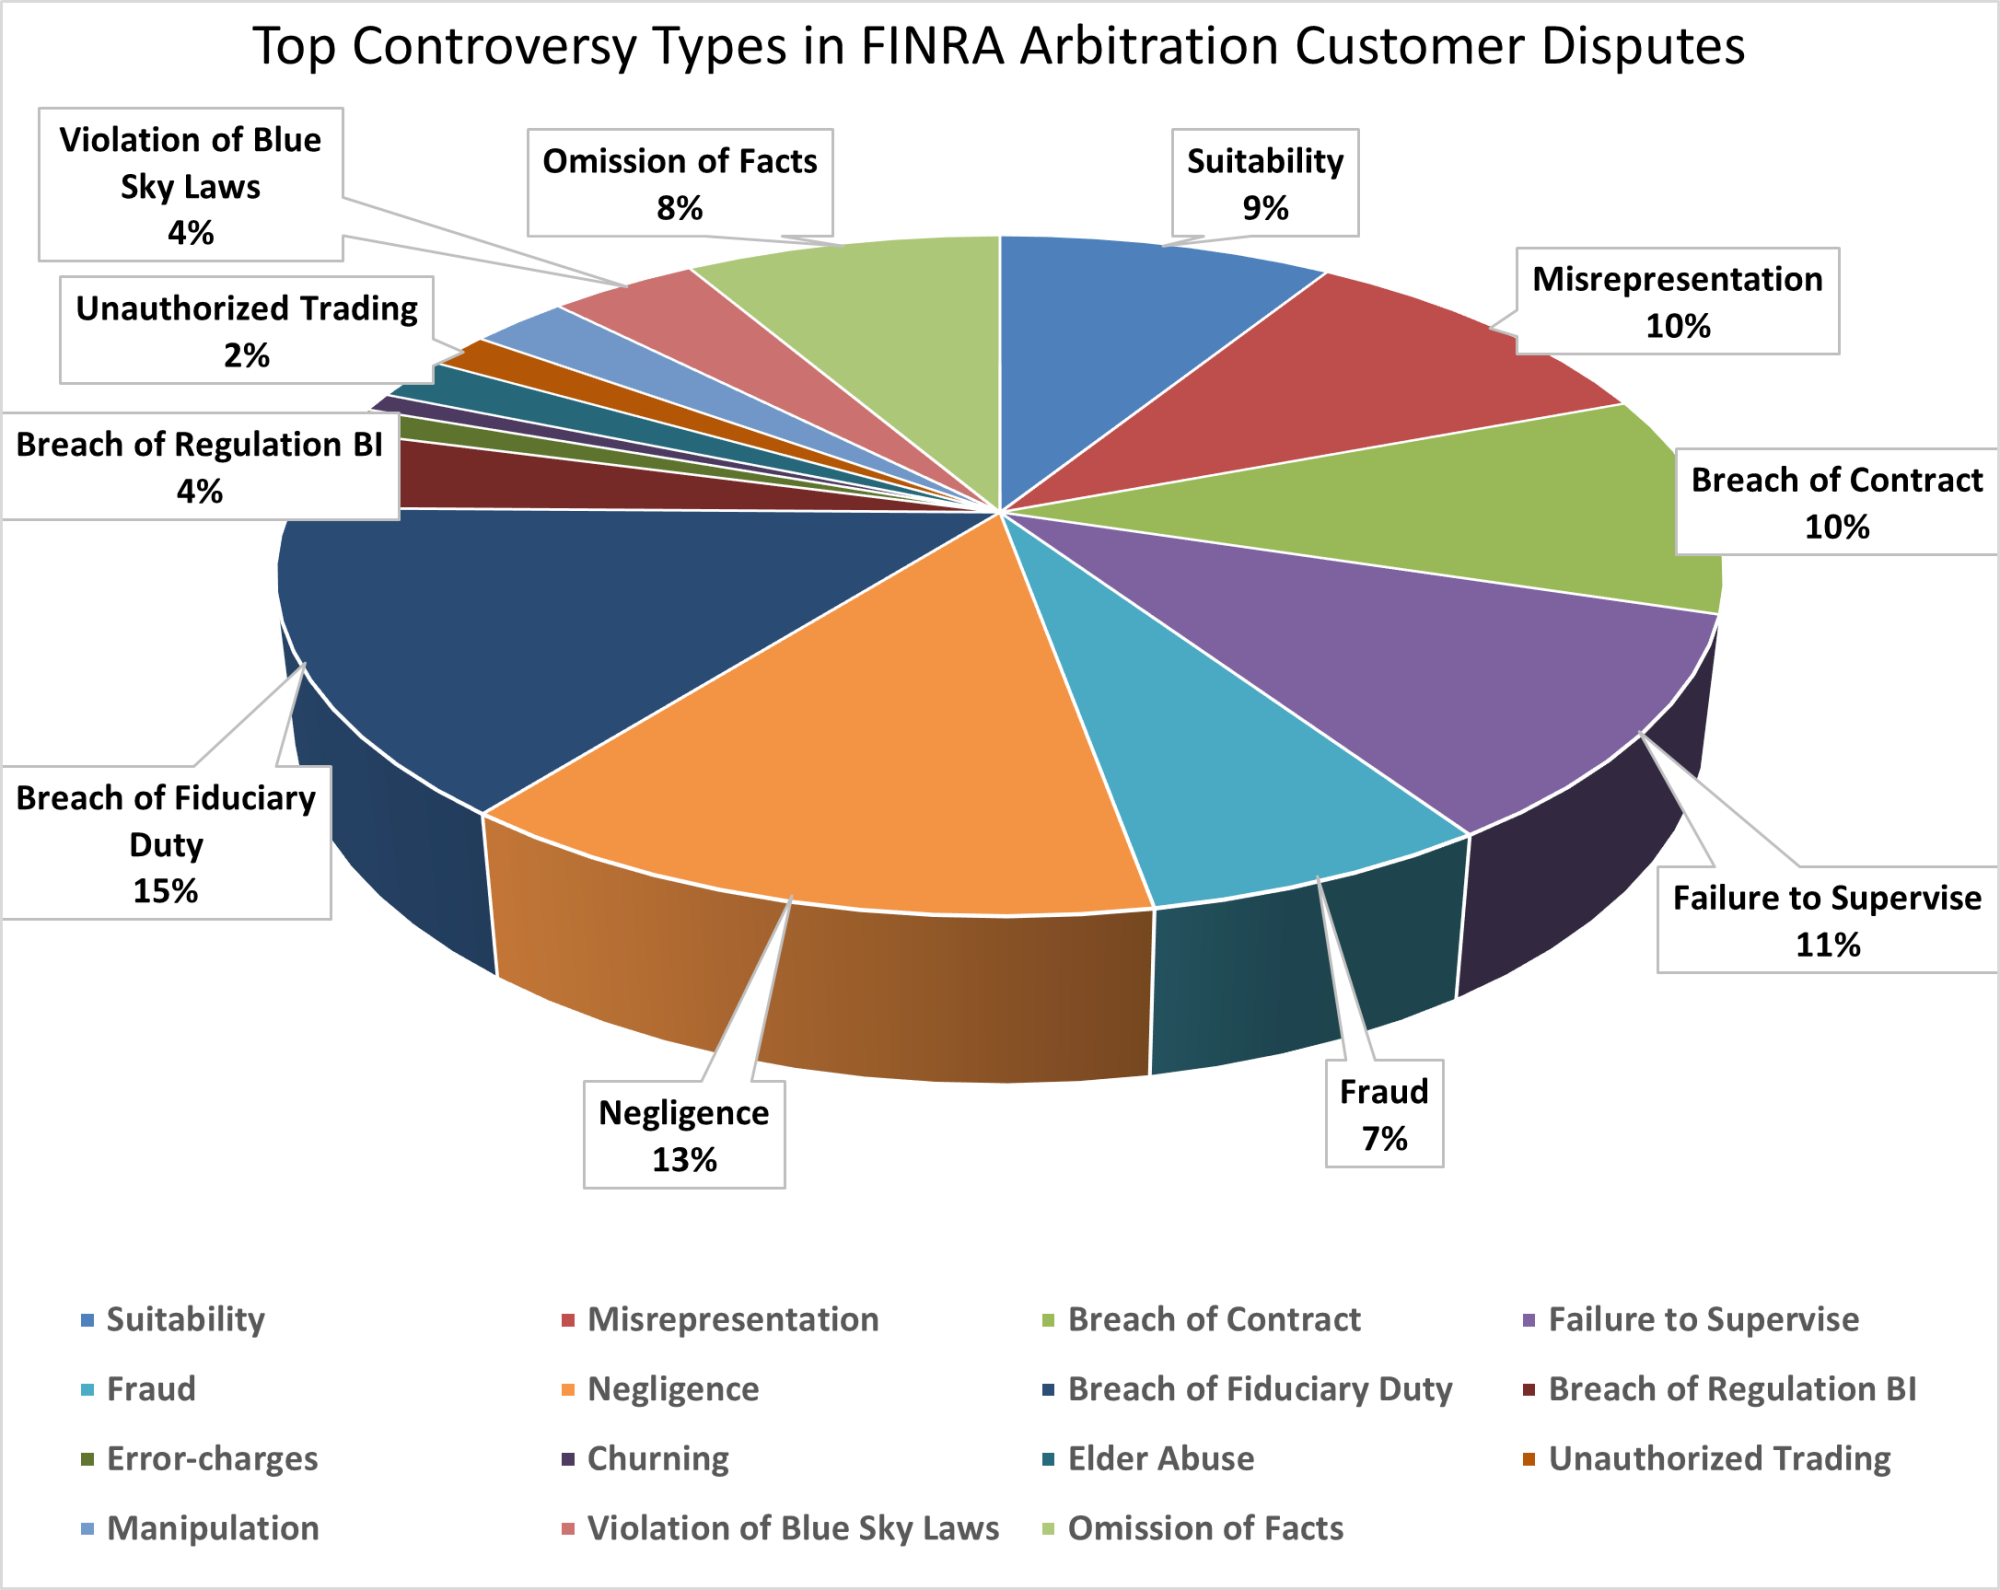 Top Controversy Types in FINRA Arbitration Customer Disputes Chart